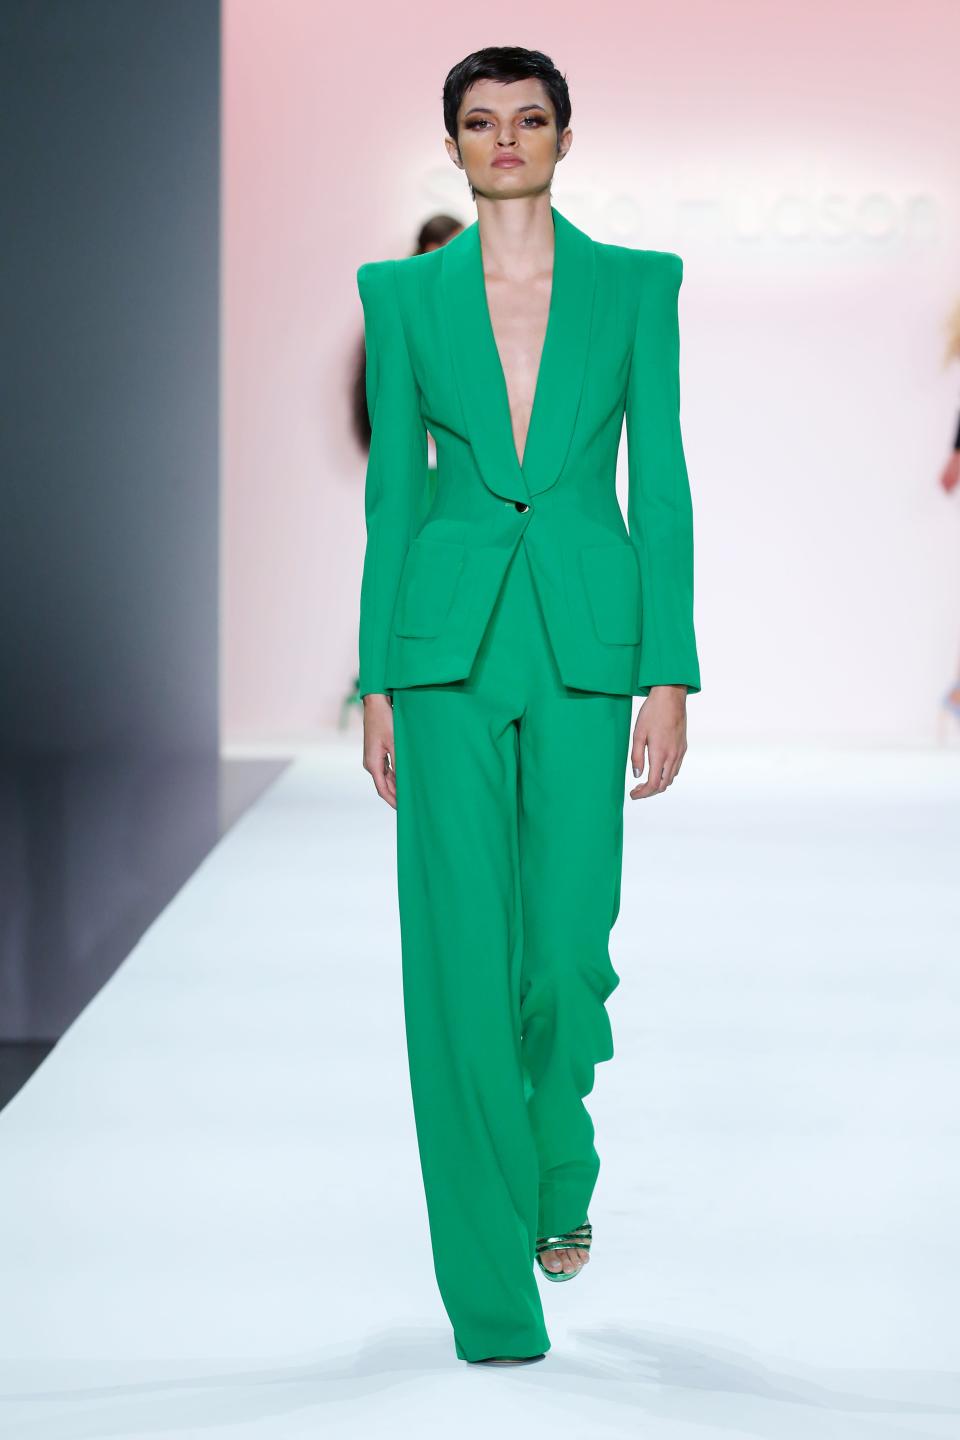 <h2>Summer 2022 Trend: Colored Suits</h2><br>While <a href="https://www.refinery29.com/en-us/2021/07/10569243/workwear-post-covid" rel="nofollow noopener" target="_blank" data-ylk="slk:workwear" class="link ">workwear</a> might have been obliterated as a category as a result of the pandemic and the new hybrid-office models, it's no reason to give up the power suit. For summer, trade your black or tan pant style for something brighter. Or, even better, opt for a skirt suit with a NSFW hemline.<span class="copyright">Photo: Dan Lecca</span>